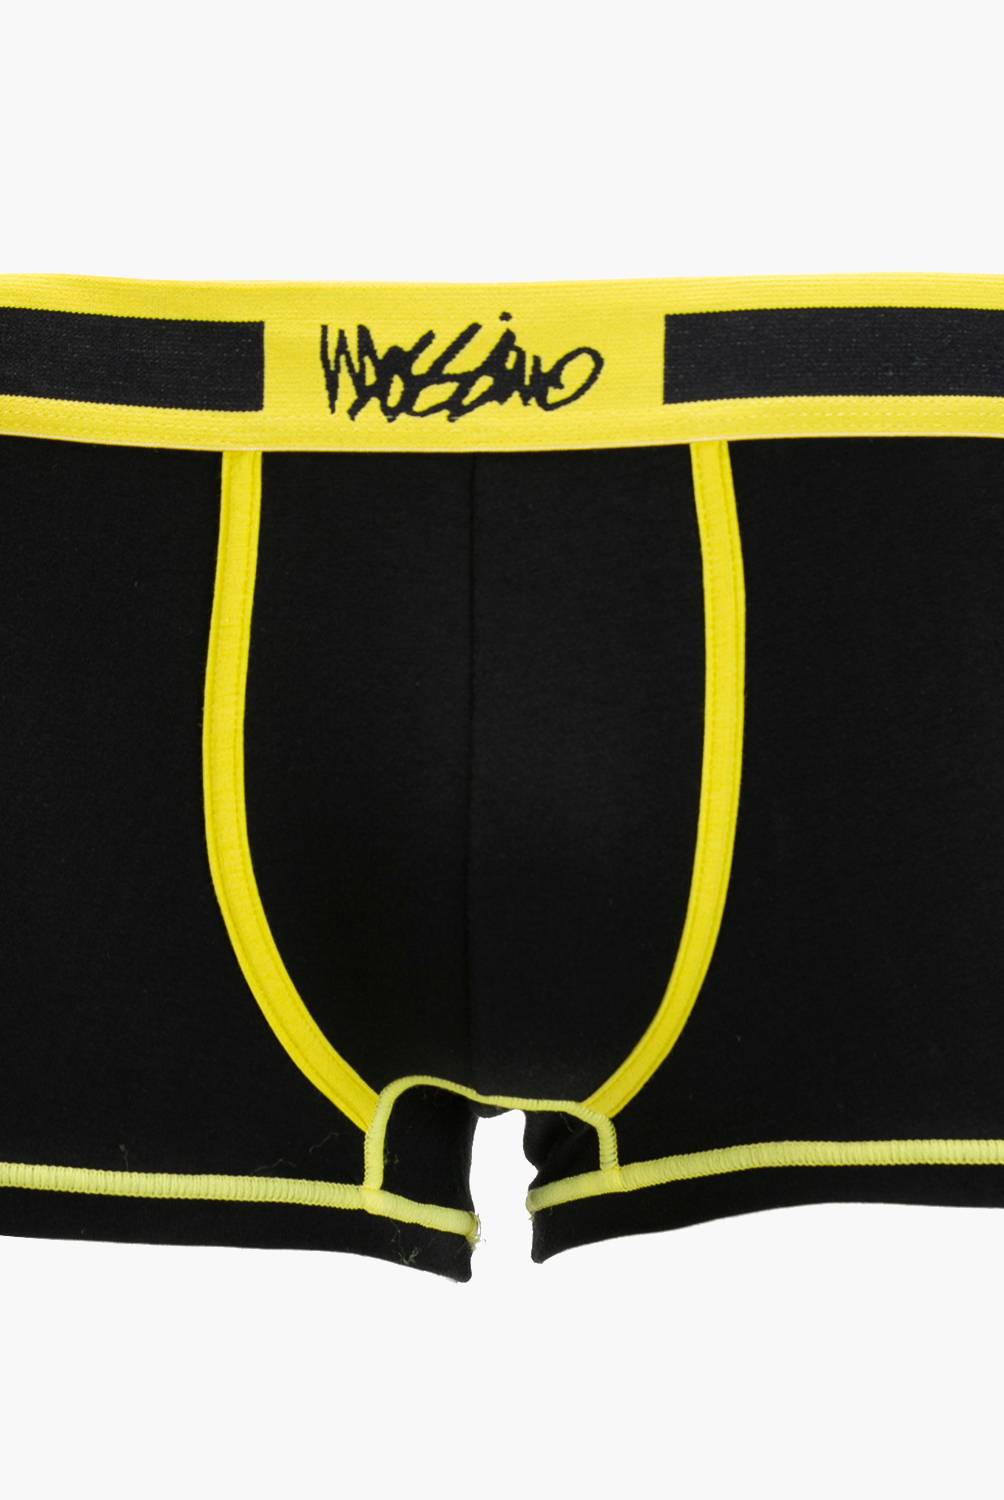 MOSSIMO - Boxer Pack x4 Hombre